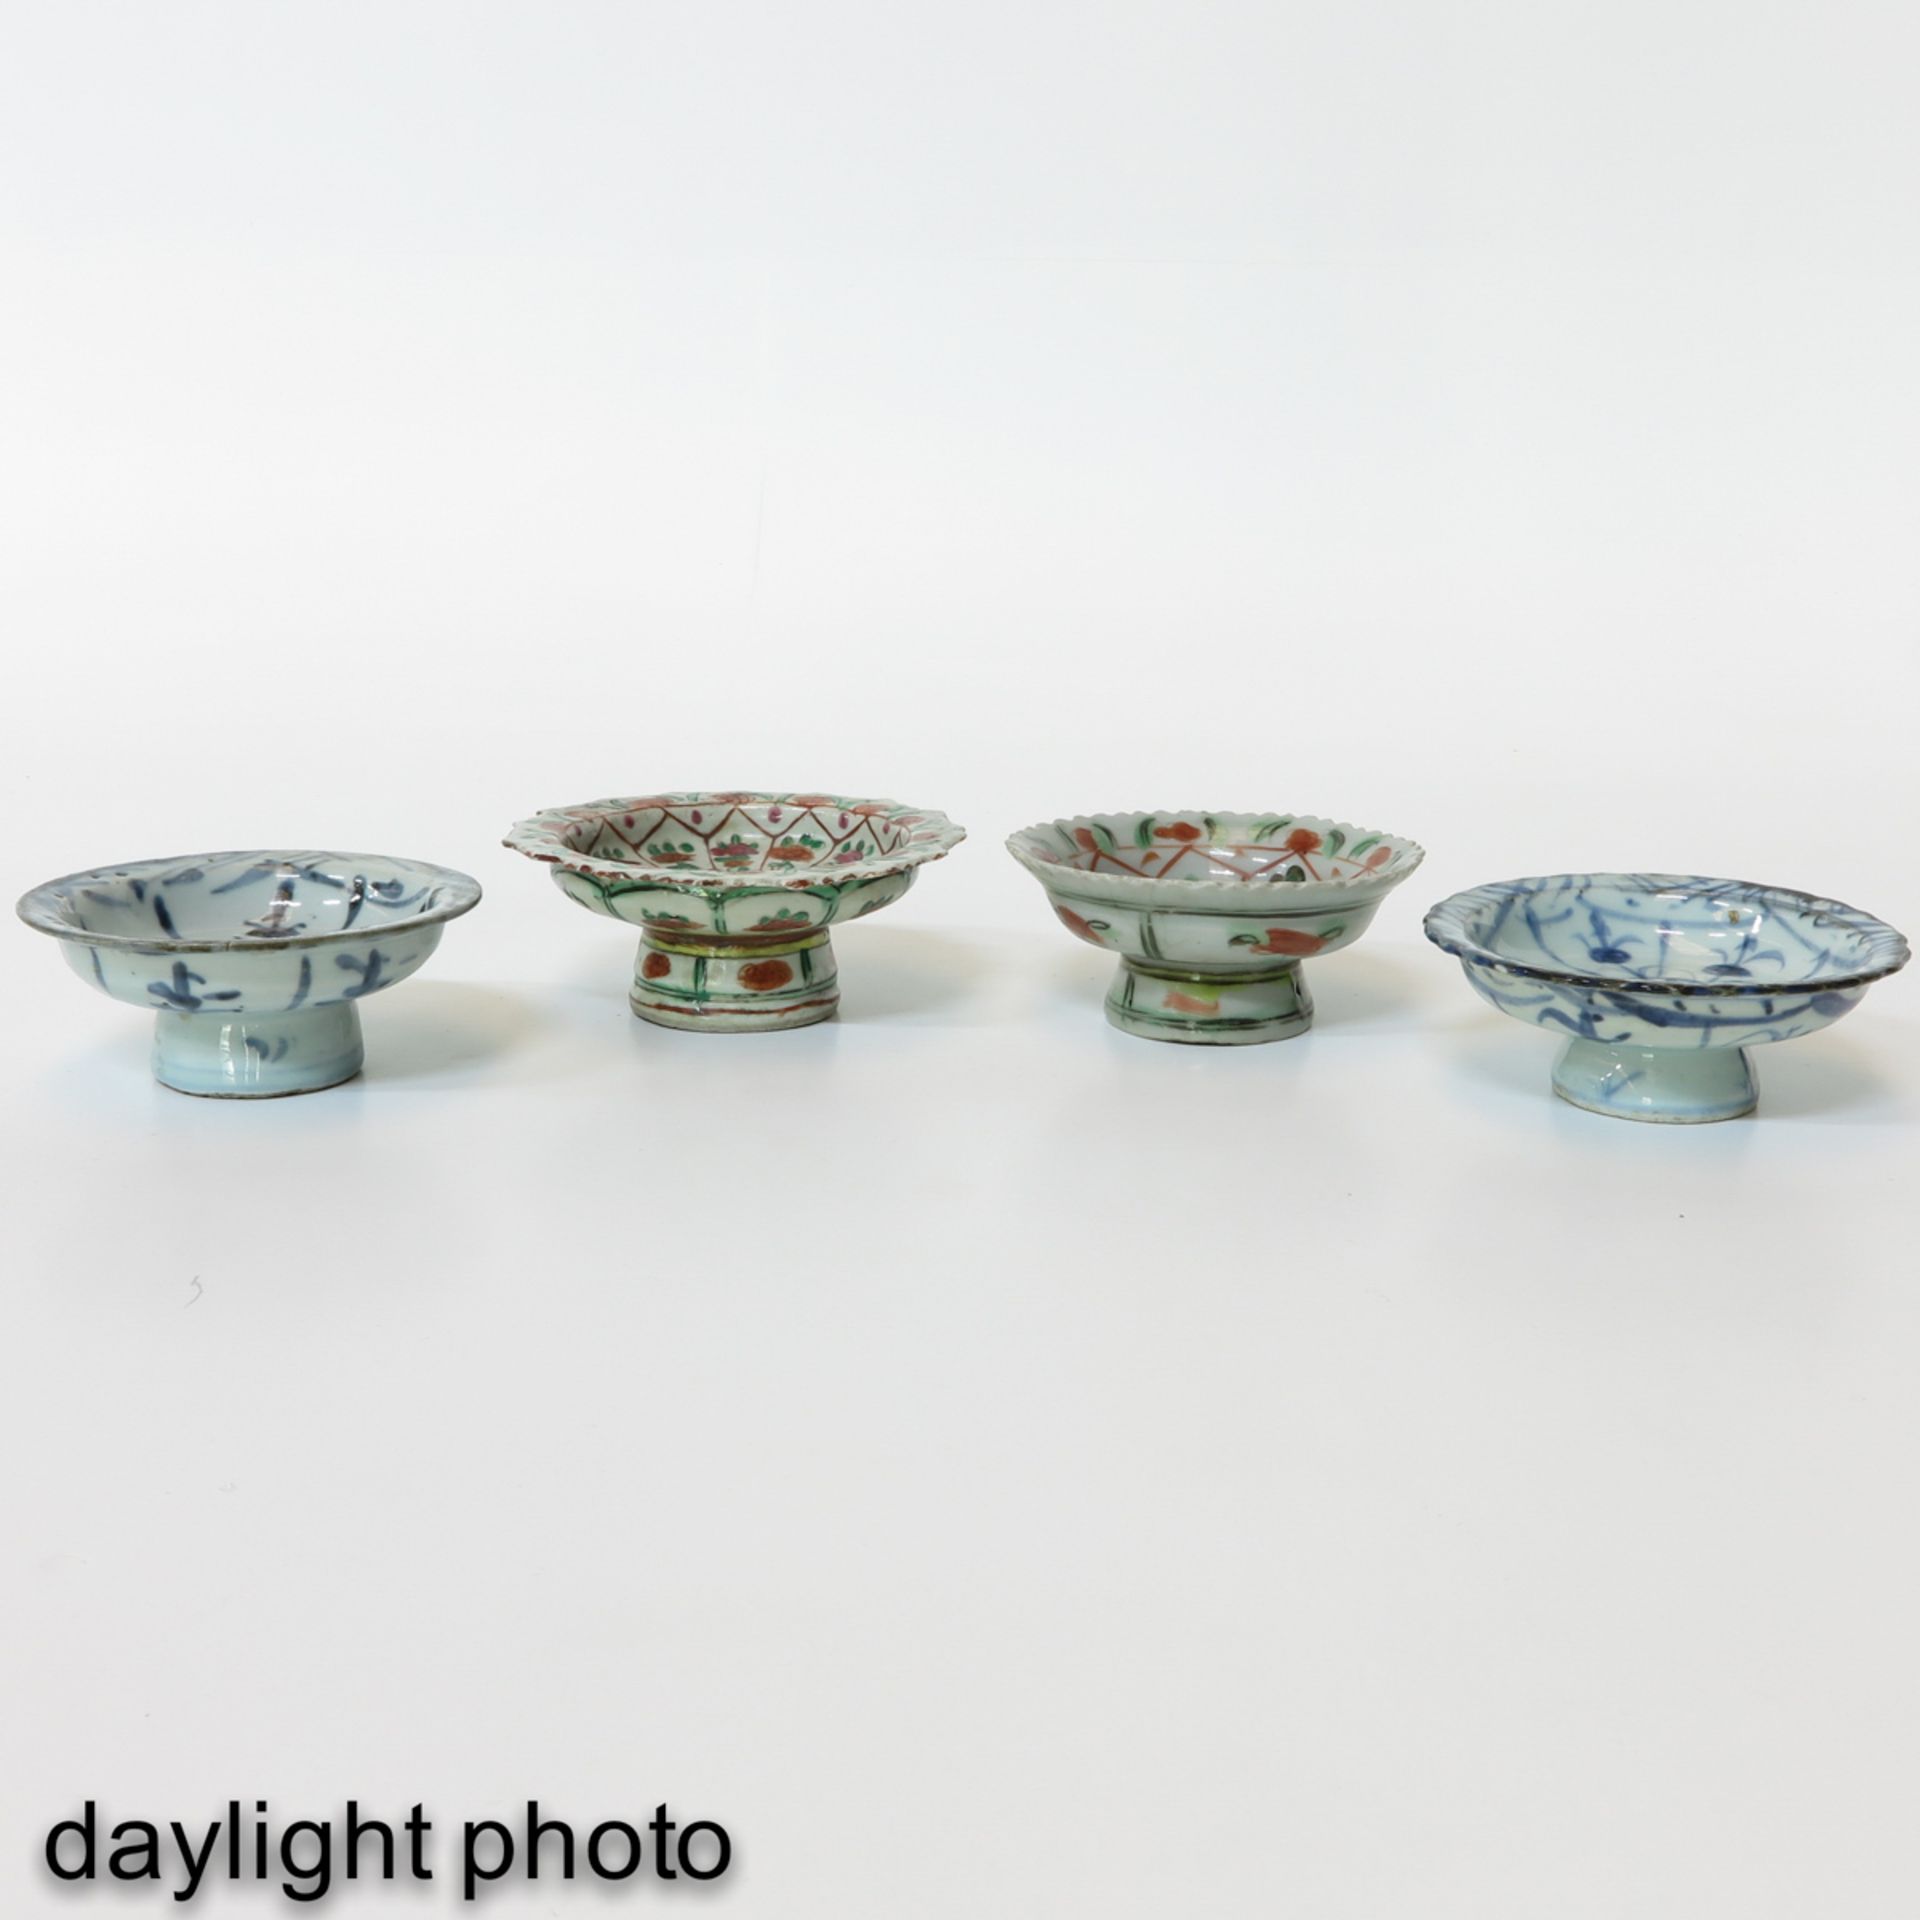 A Collection of 4 Stemmed Bowls - Image 7 of 10